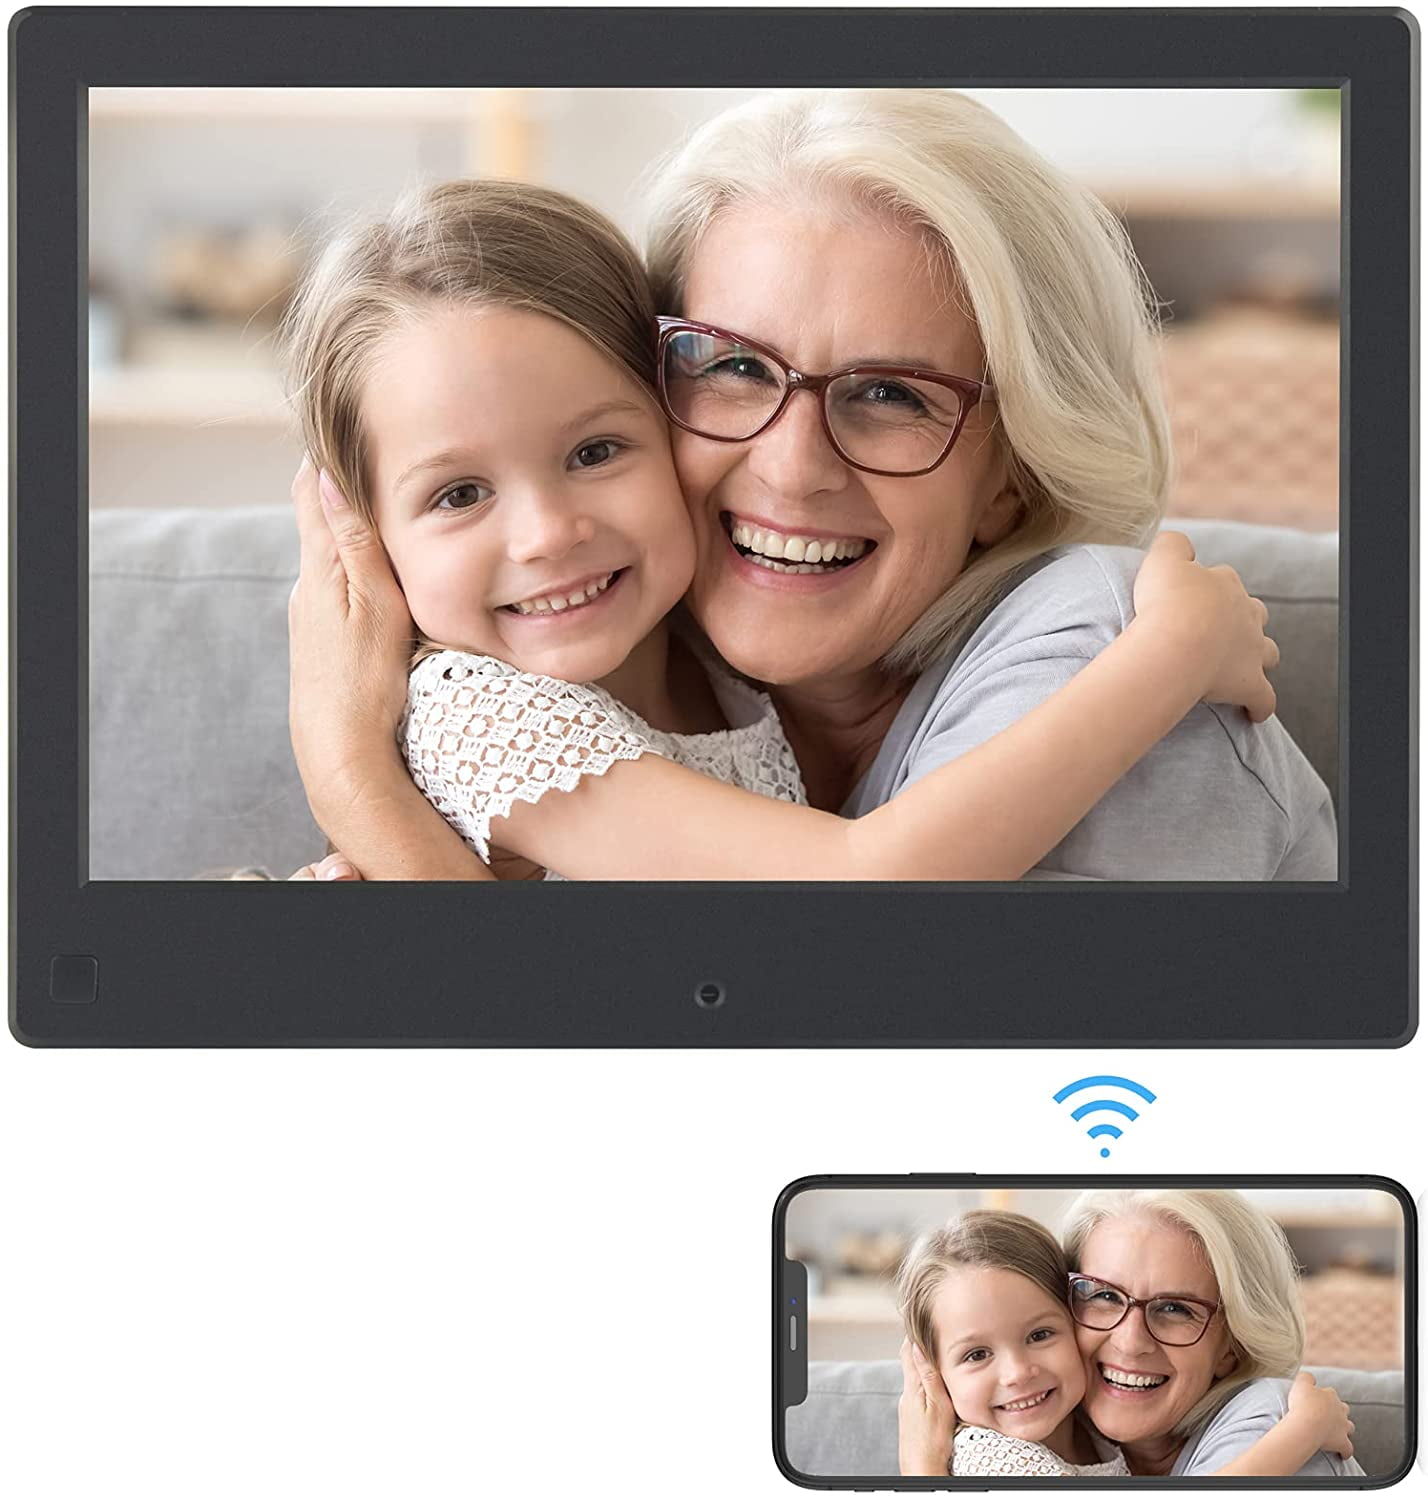 BSIMB Wifi Cloud Digital Photo Frame Digital Picture Frame Dual Display 9 Inch+5.5 Inch IPS Touch Screen Motion Sensor Sent Photos from Anywhere Support iOS/Android.Facebook.Twitter.Email W09 Plus 16G 